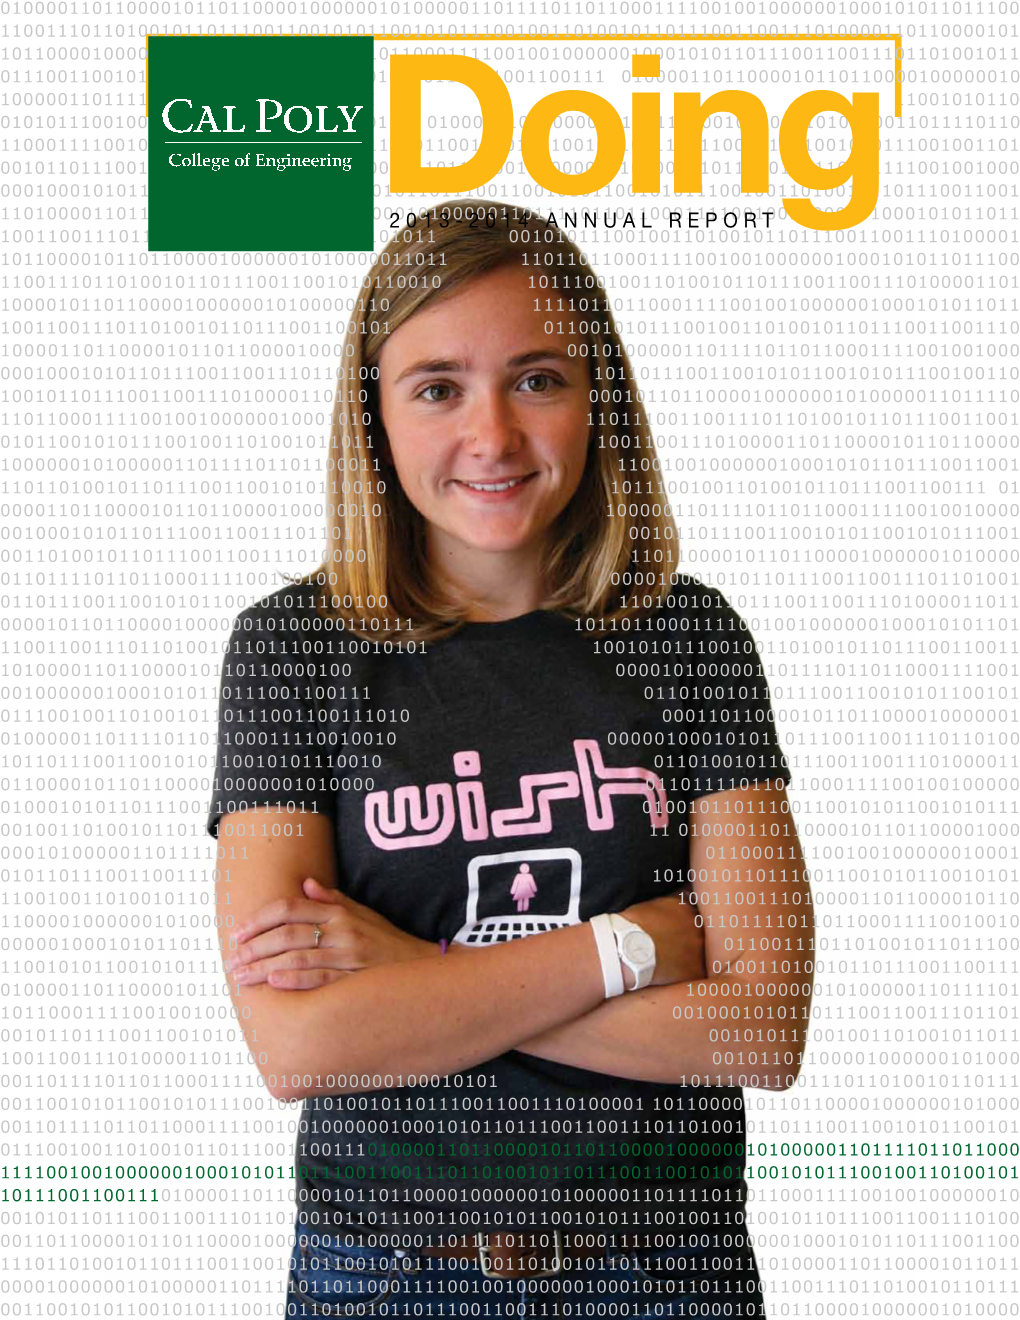 Cal Poly College of Engineering 2013-2014 Annual Report